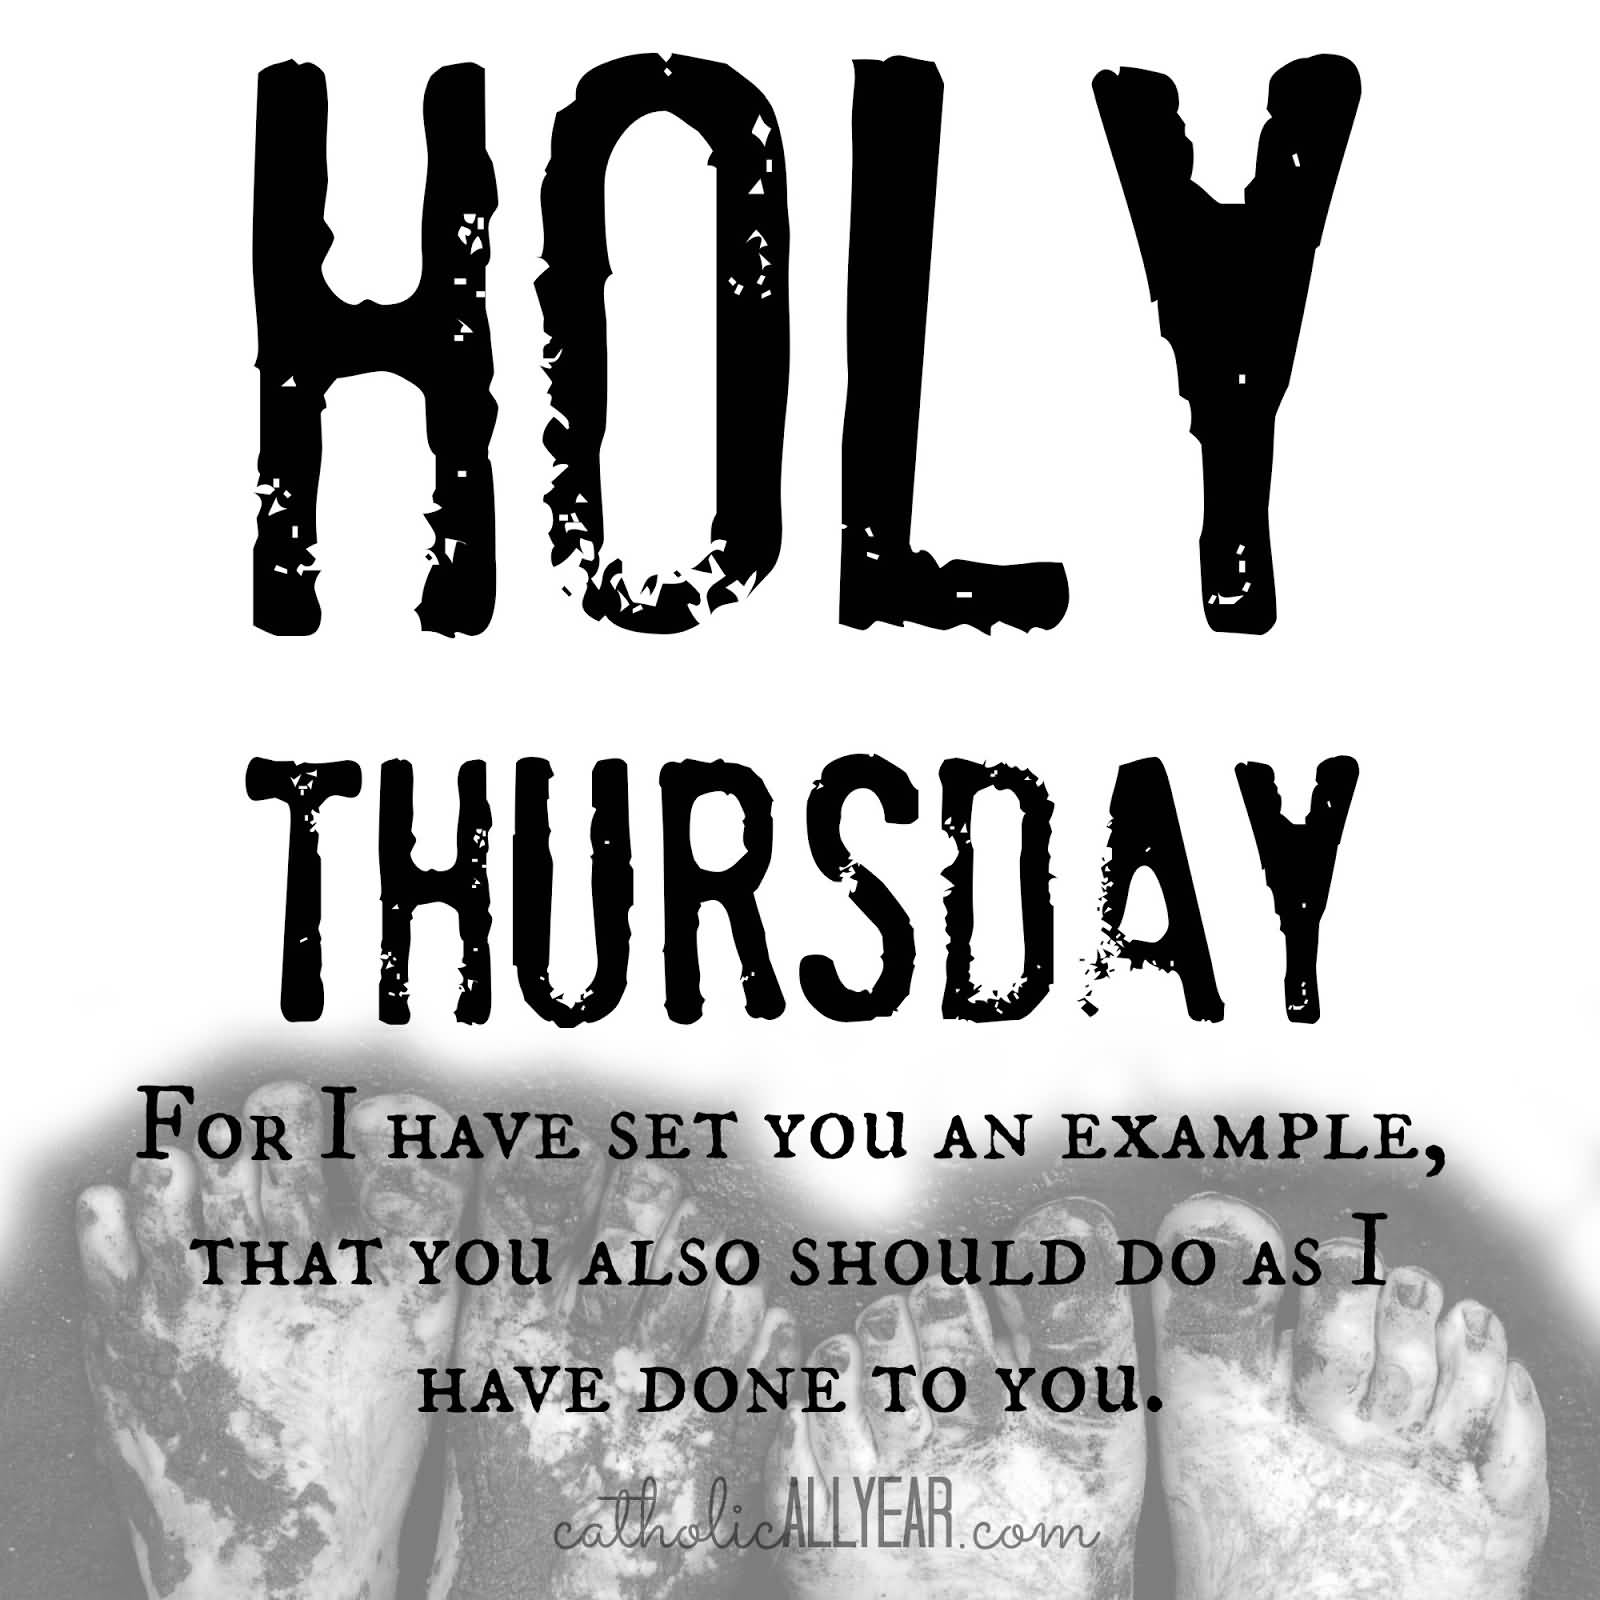 Holy Thursday For I Have Set You An Example That You Also Should Do As I Have Done To You